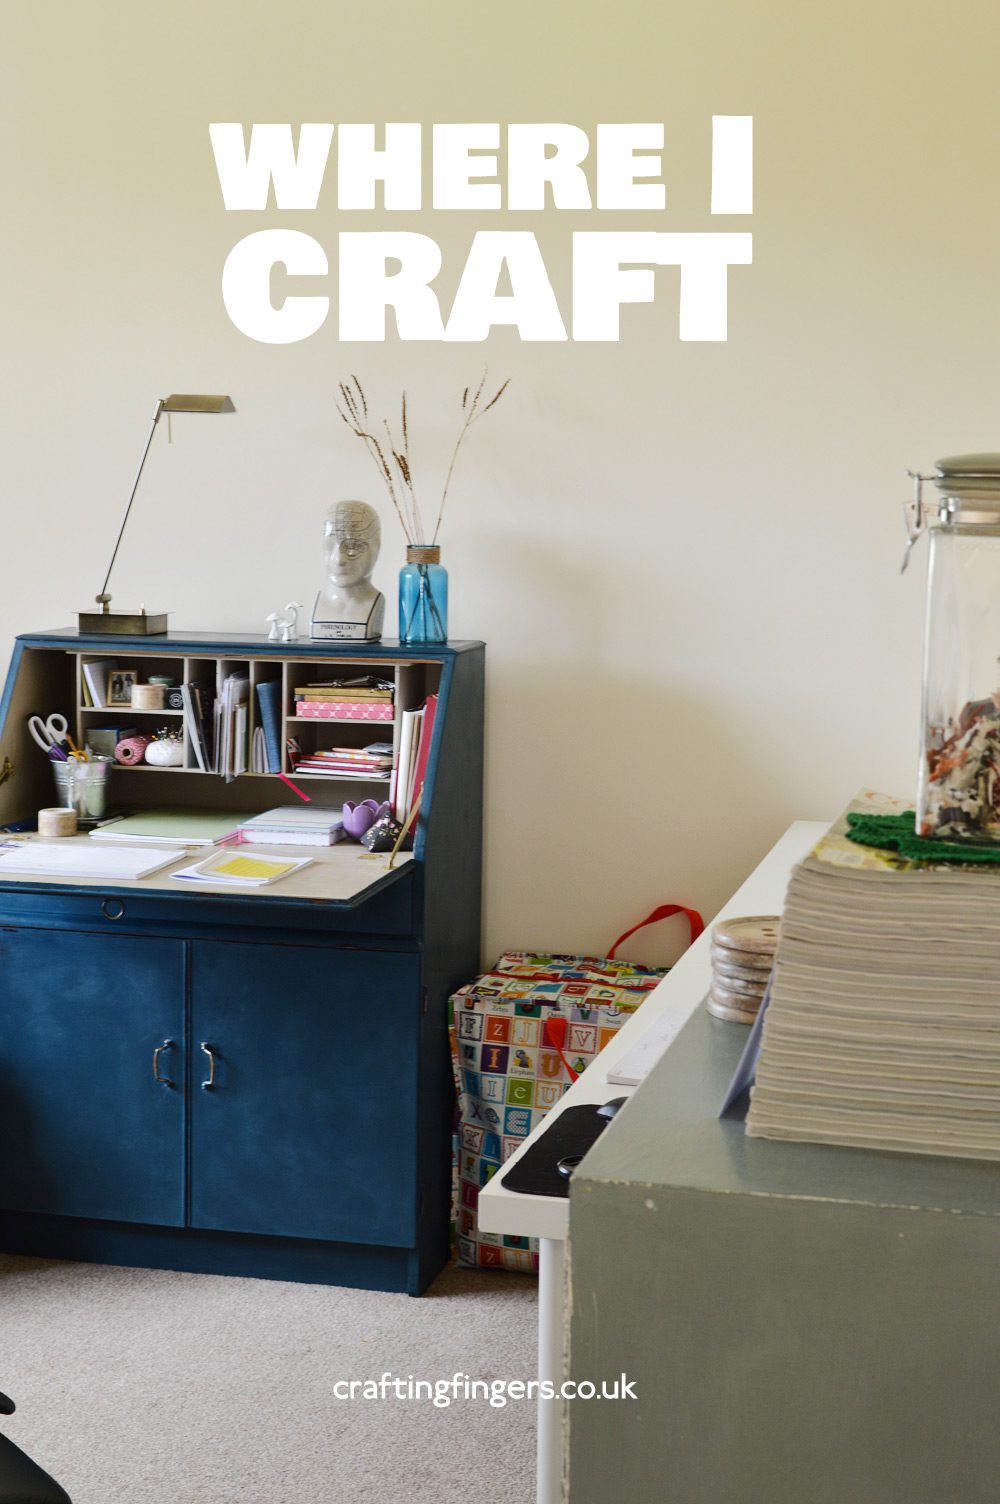 My craft room | Crafting Fingers